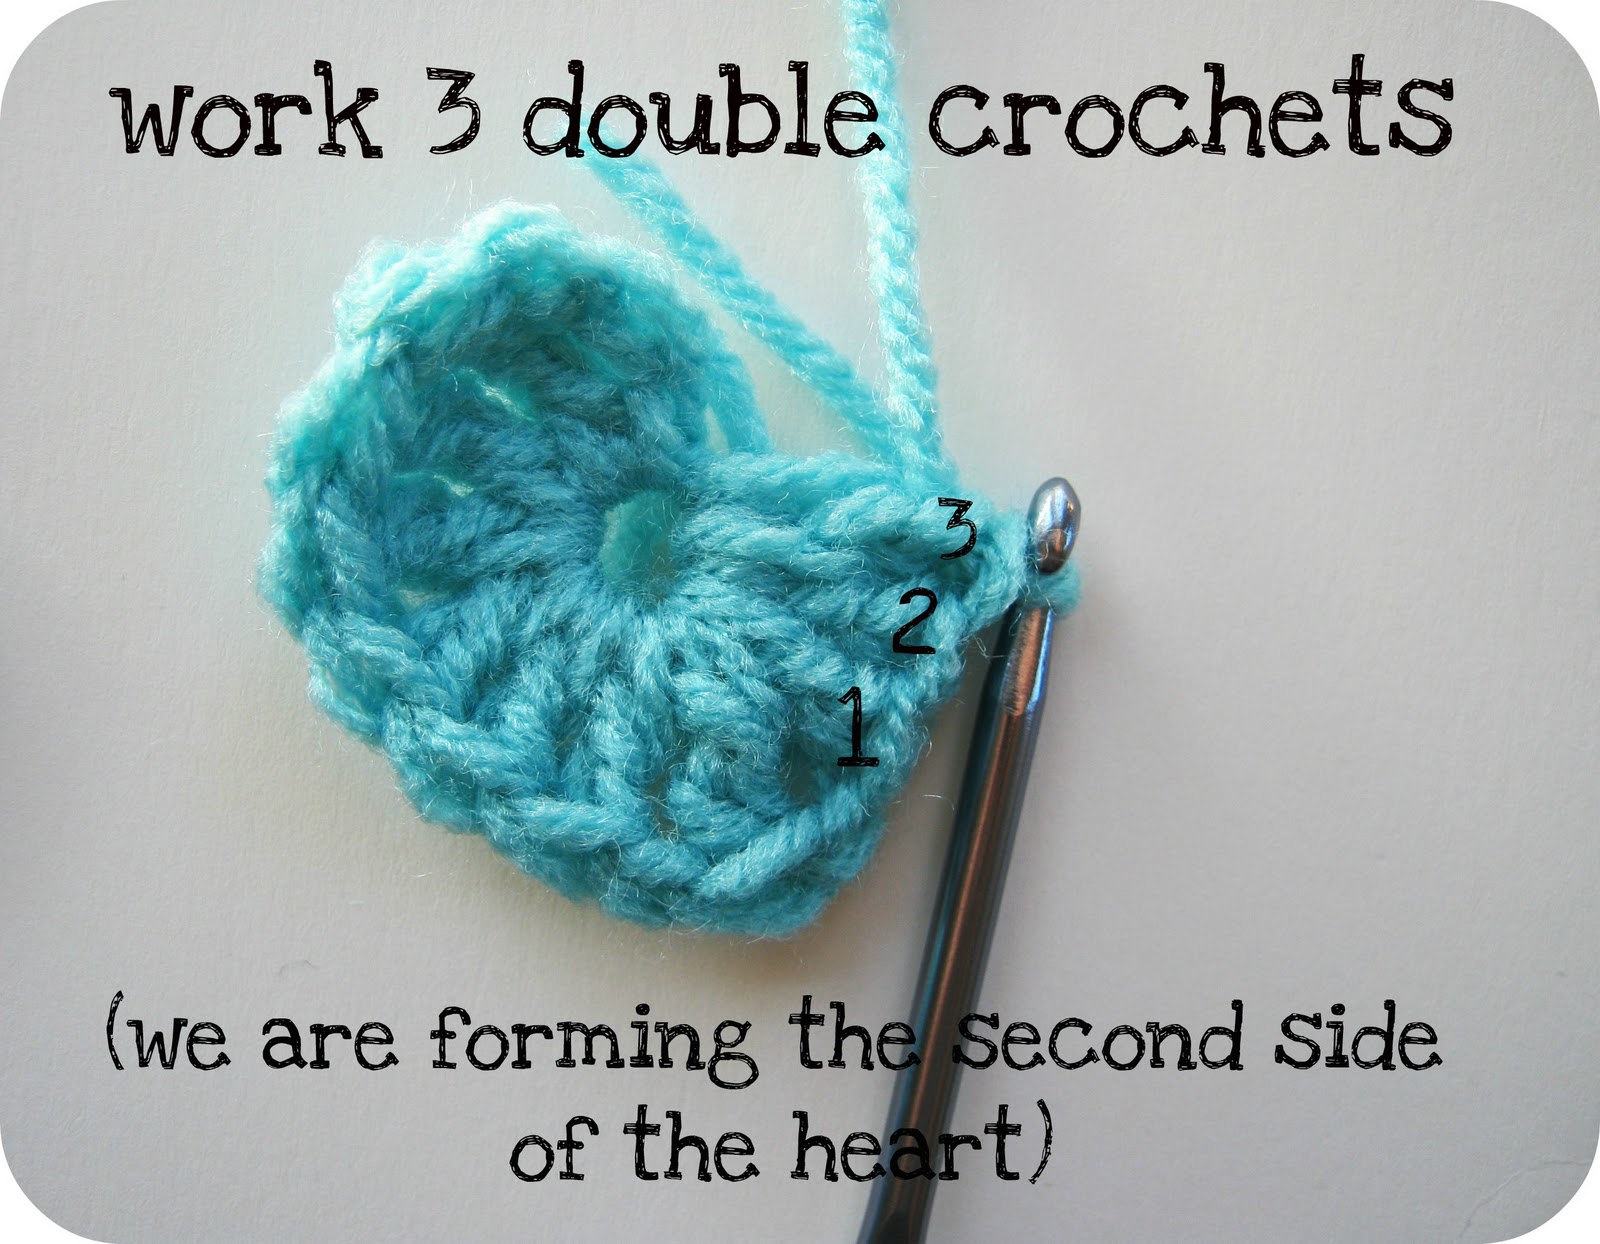 How To Crochet - Want To Be a Crochet Expert Fast